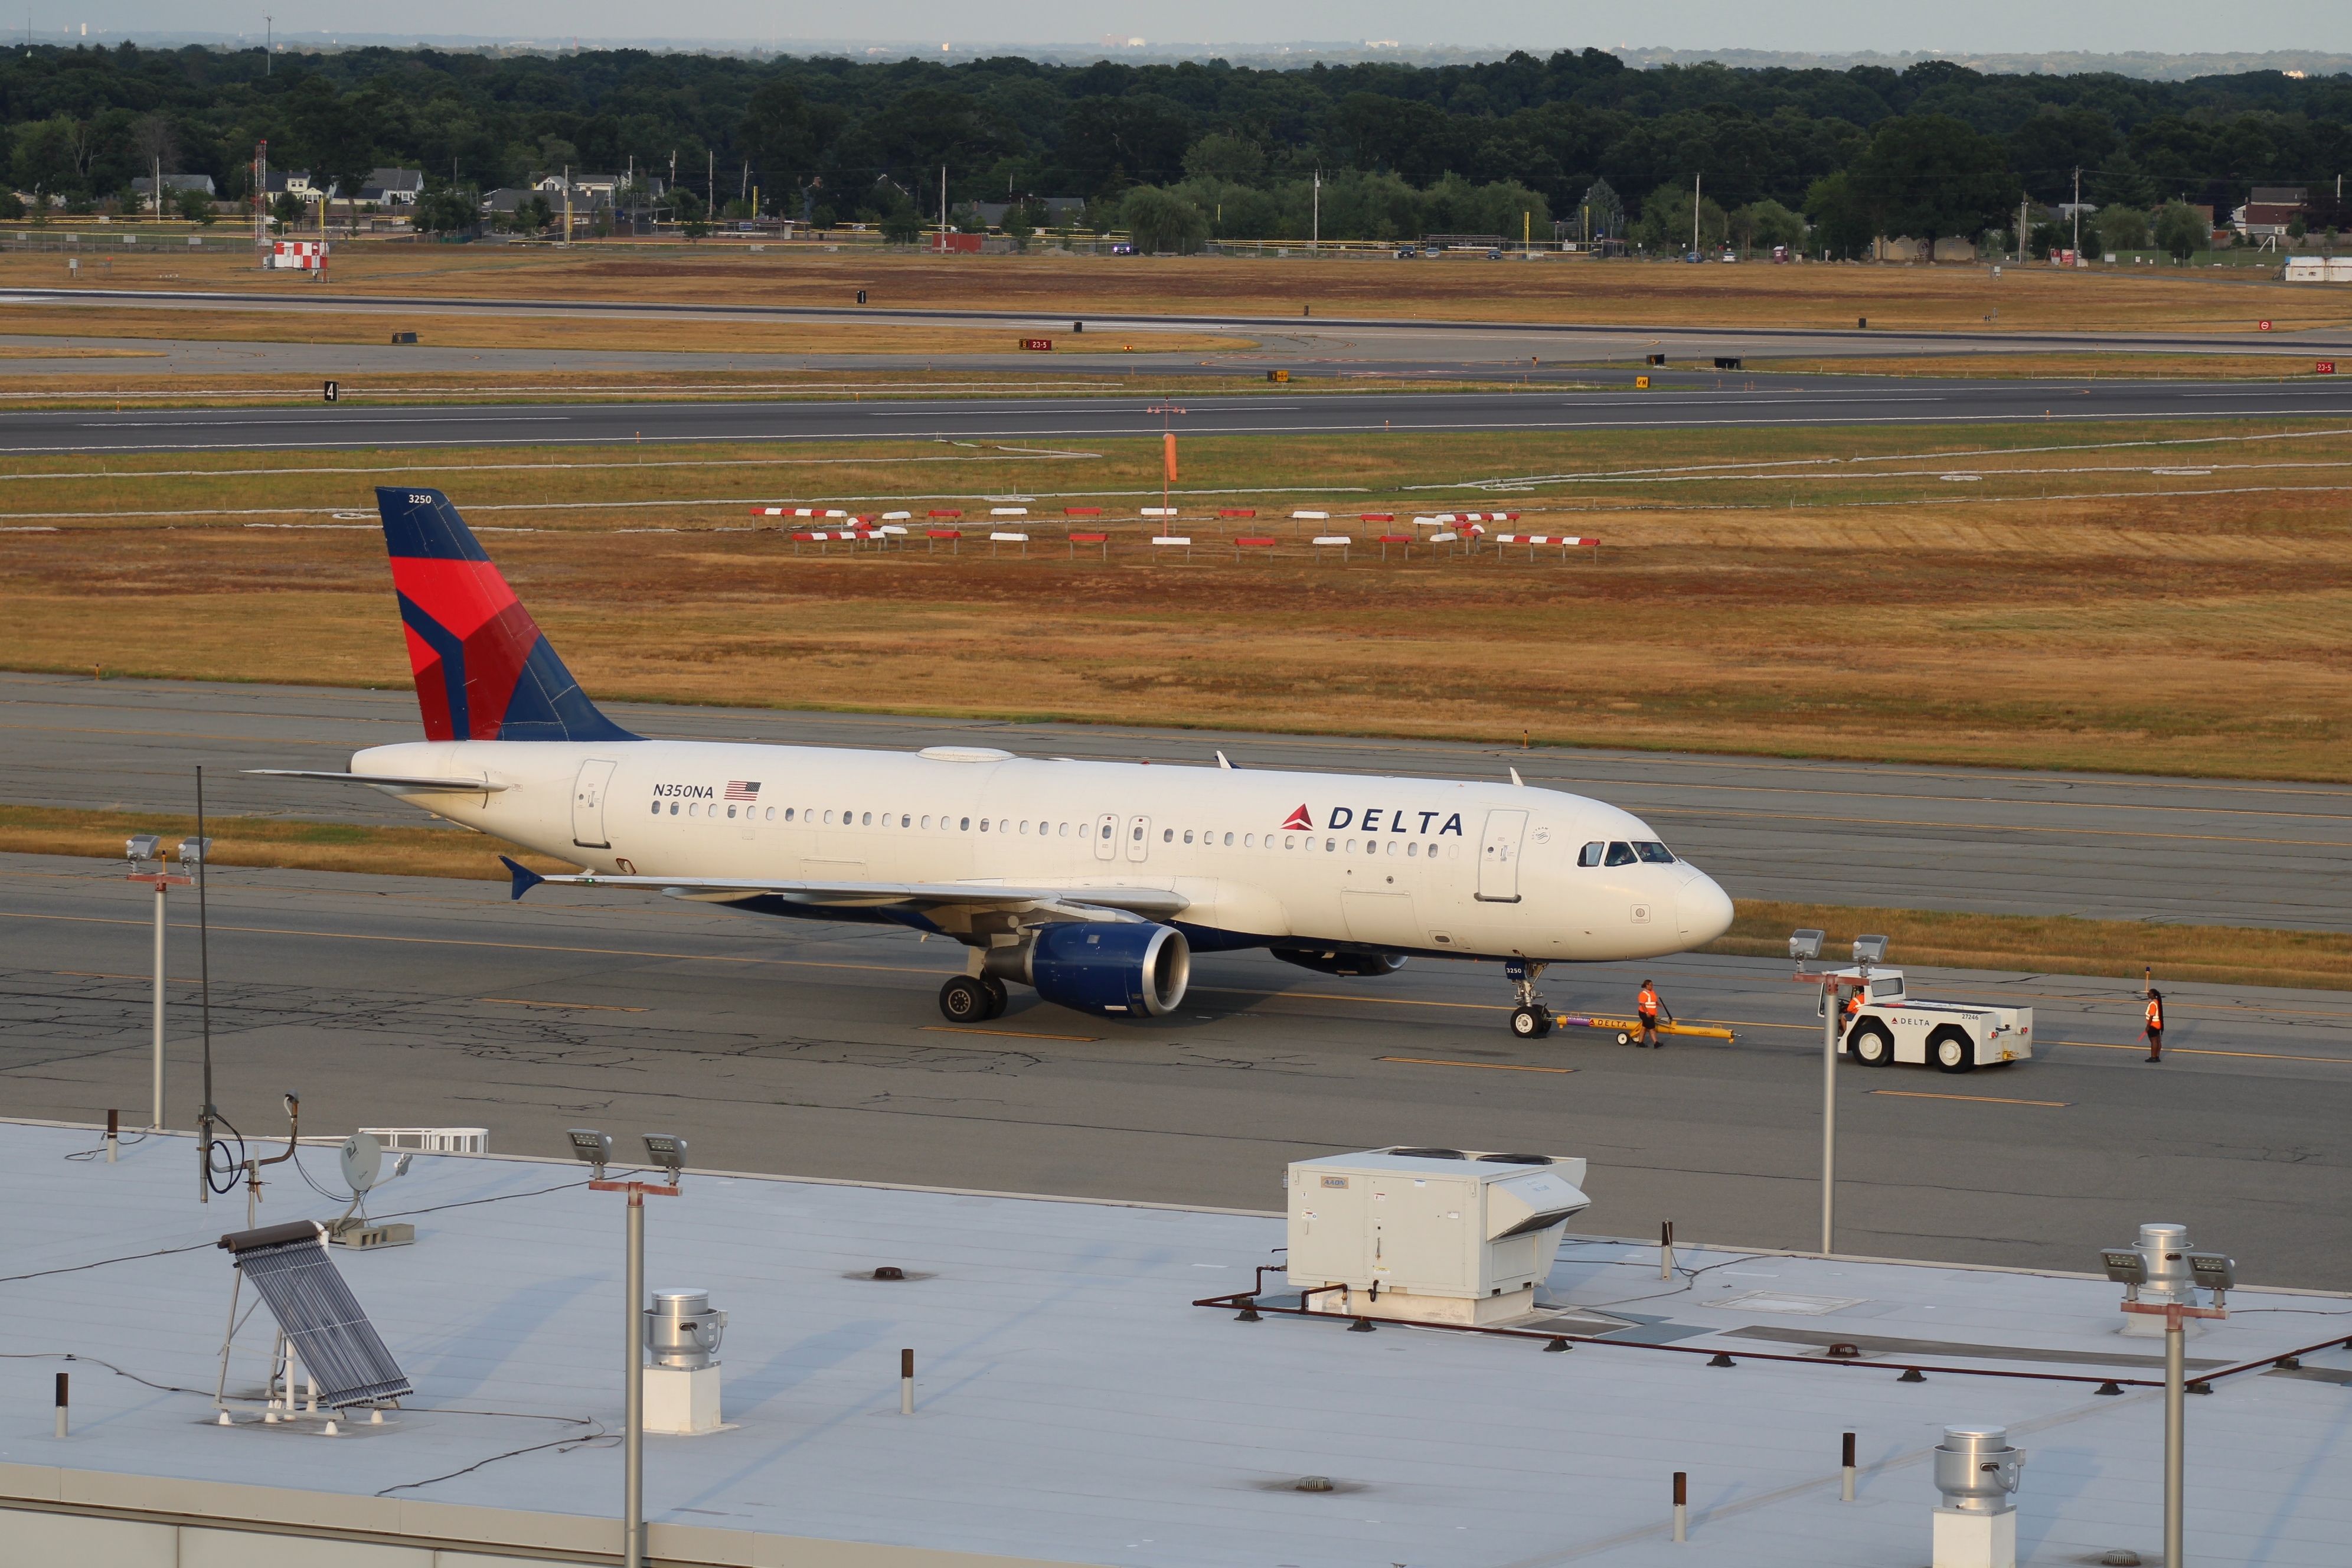 Delta Air Lines Airbus A220-100 and A320-200 airplane at Providence (PVD) Airport.